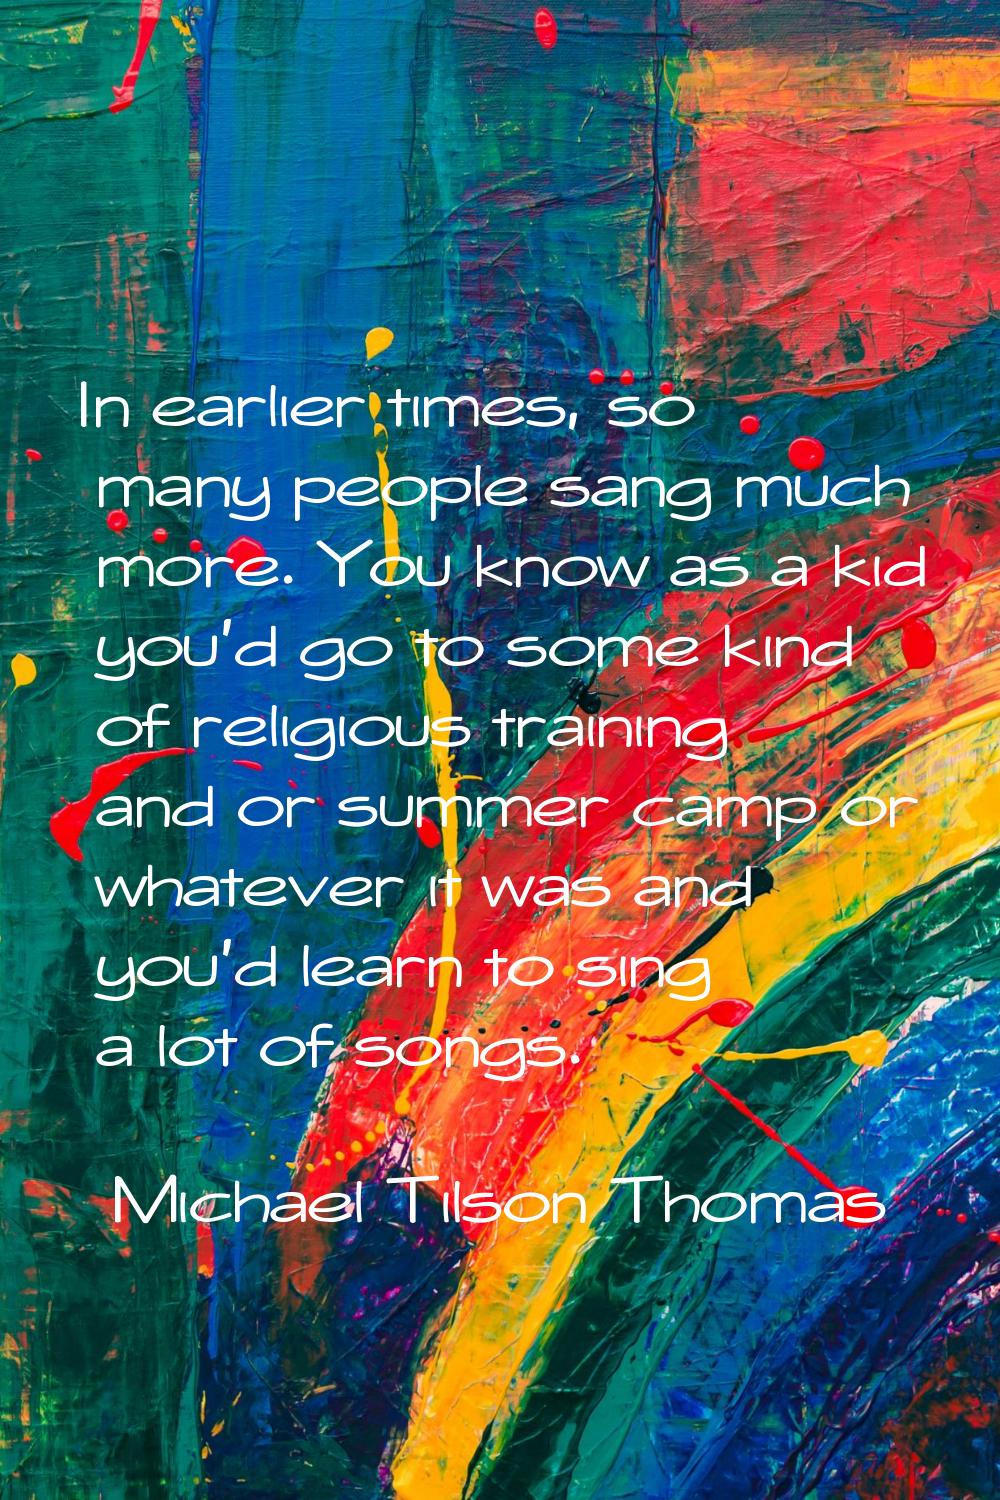 In earlier times, so many people sang much more. You know as a kid you'd go to some kind of religio